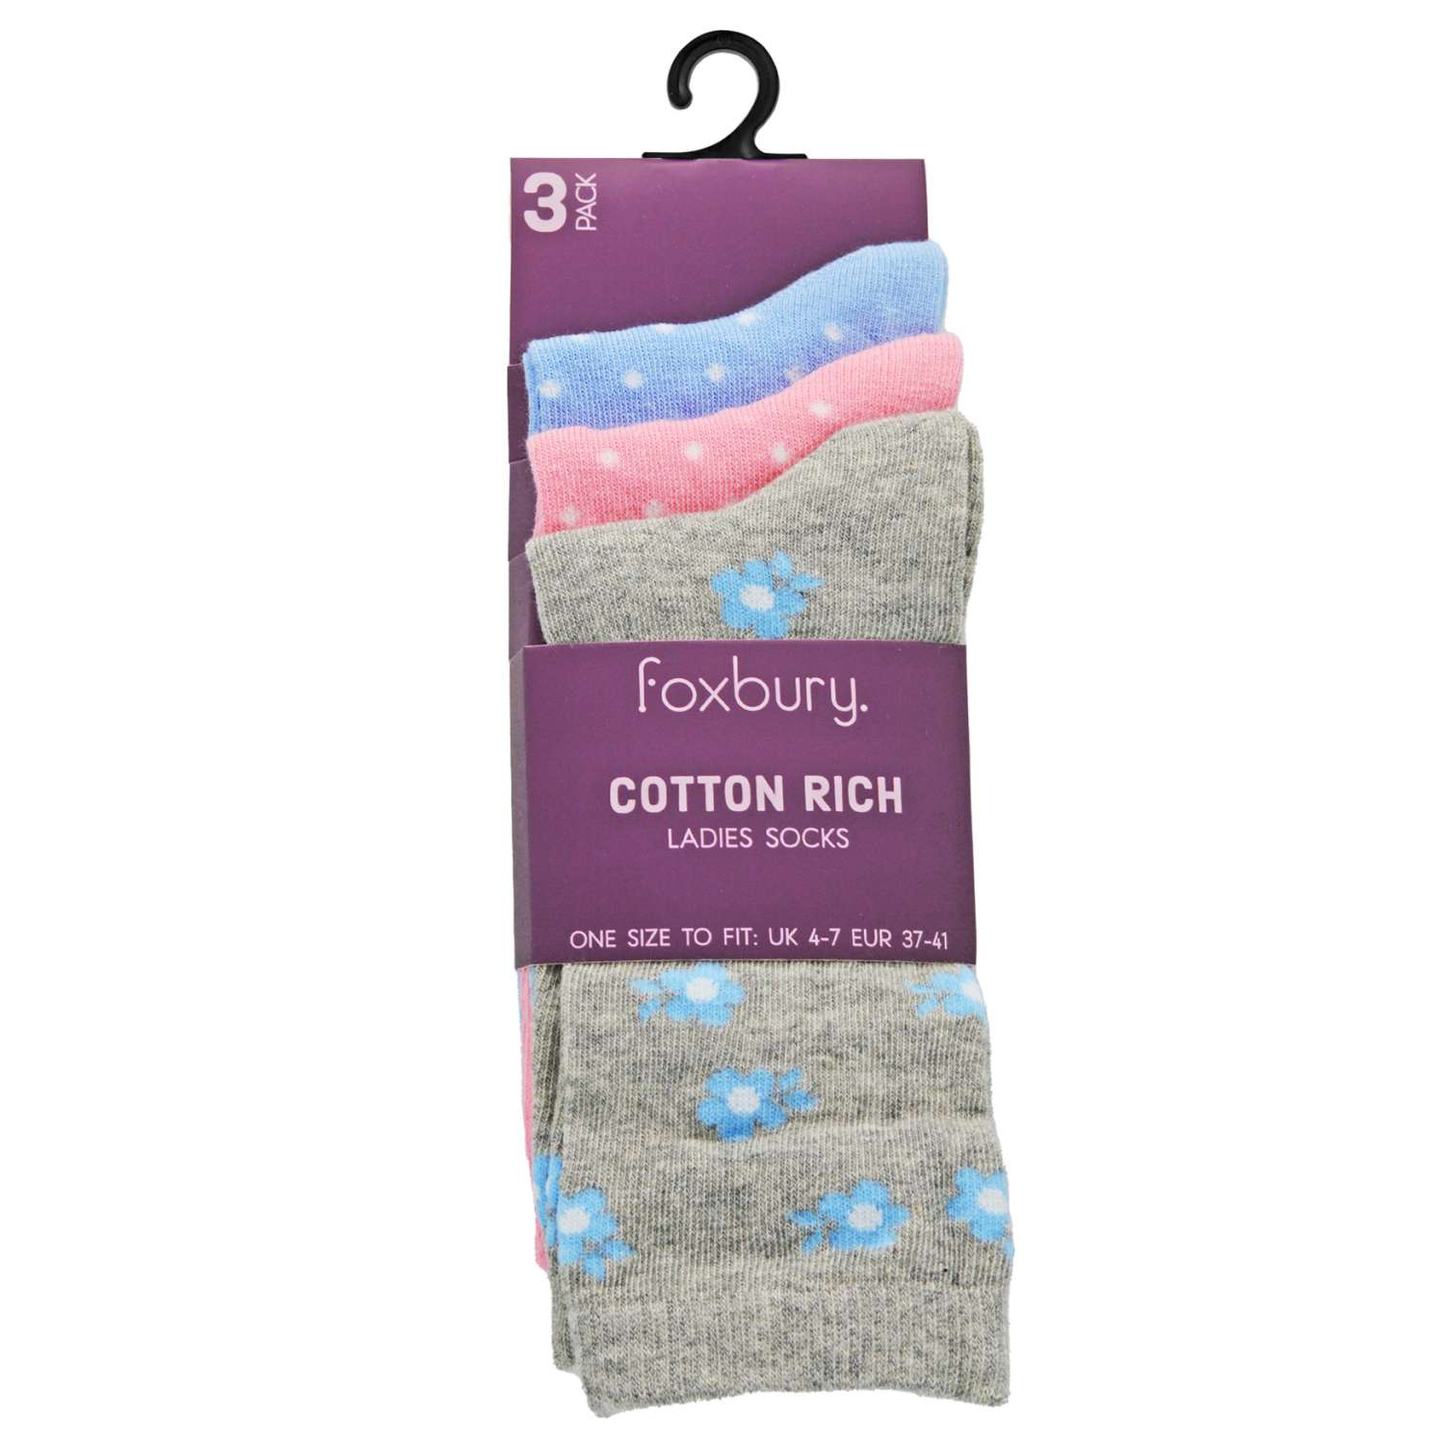 Ladies Cotton Rich Socks 3 Pack (Size 4-7) - Assorted Designs